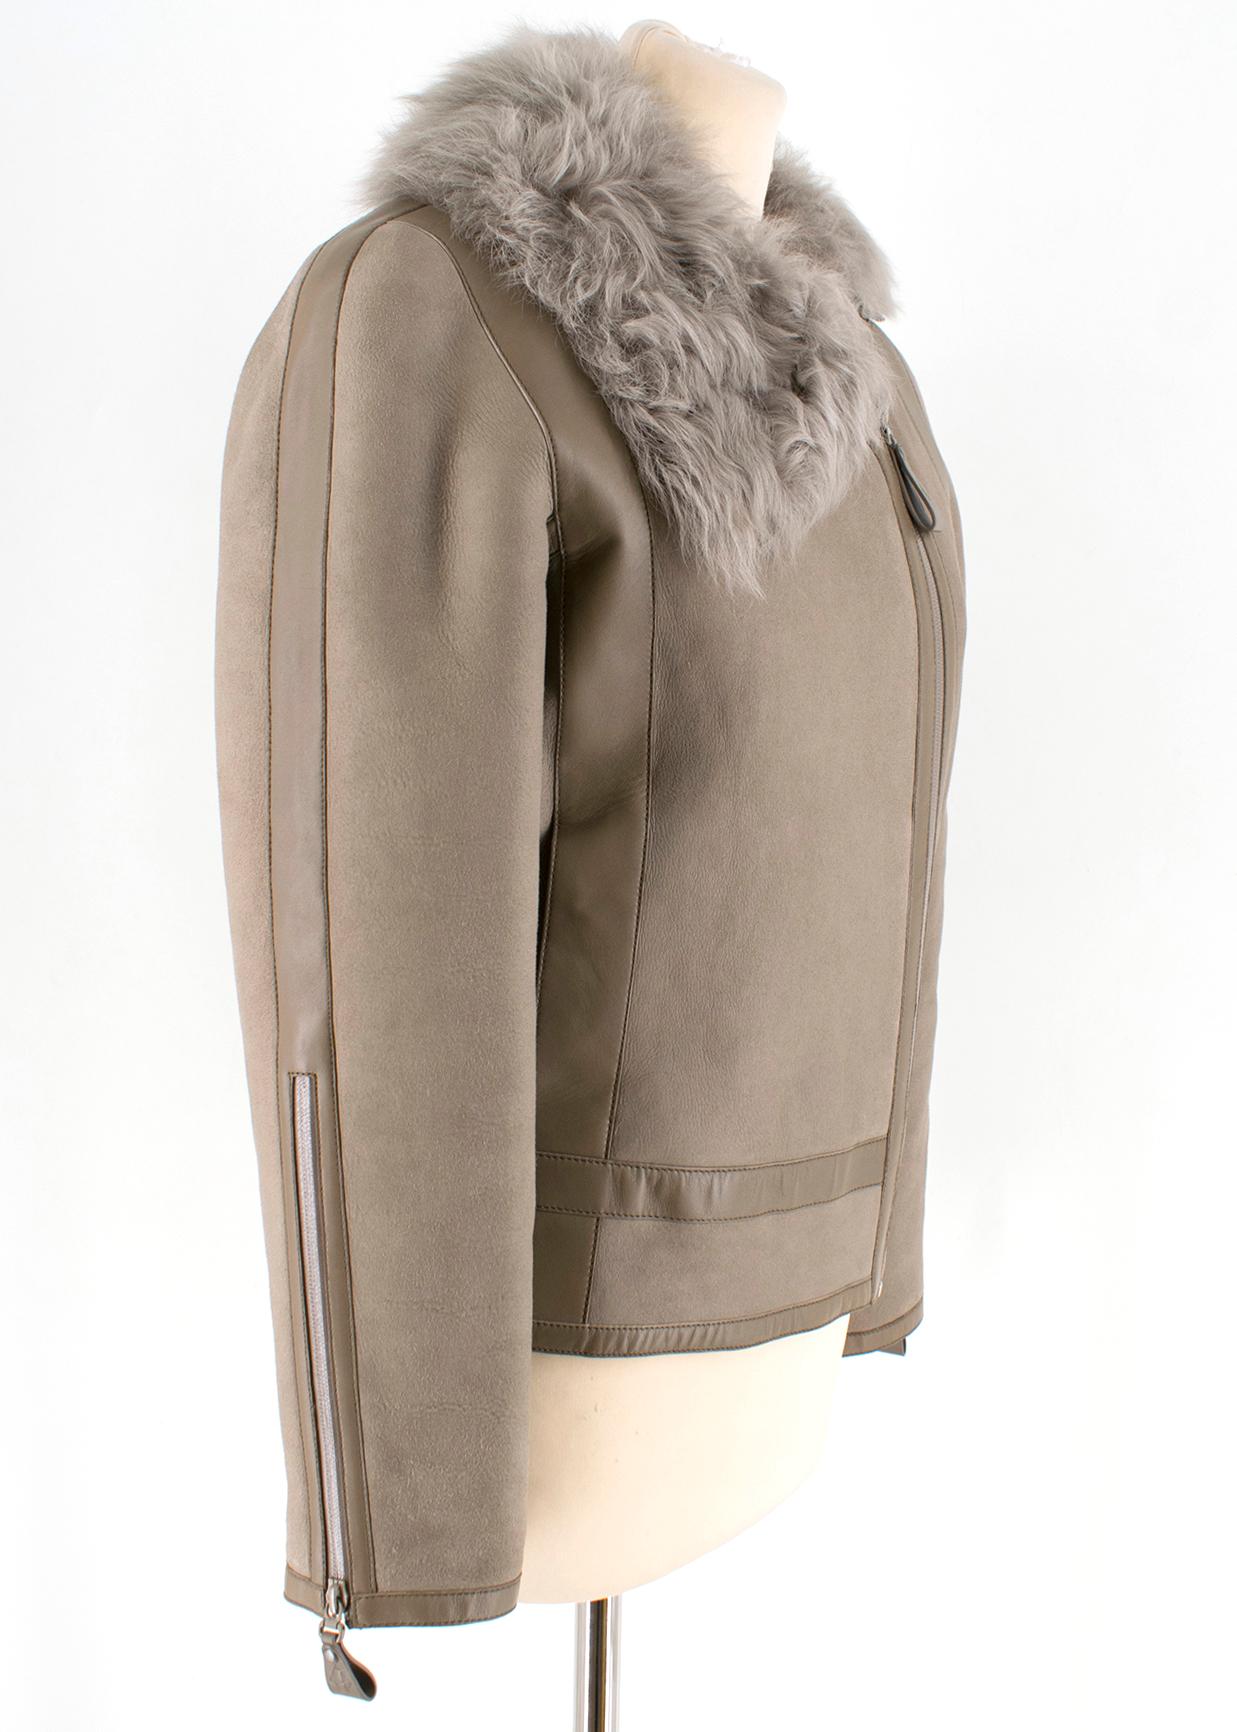 Hermes Asymmetric Suede & Shearling Jacket With Lambs Fur Collar 

Grey Lambskin Suede outer
Lamb shearling lining with a lambs fur collar
Asymmetric Zipper closure
Two interior pockets 
Two slip pockets
Two buckle features on lower back